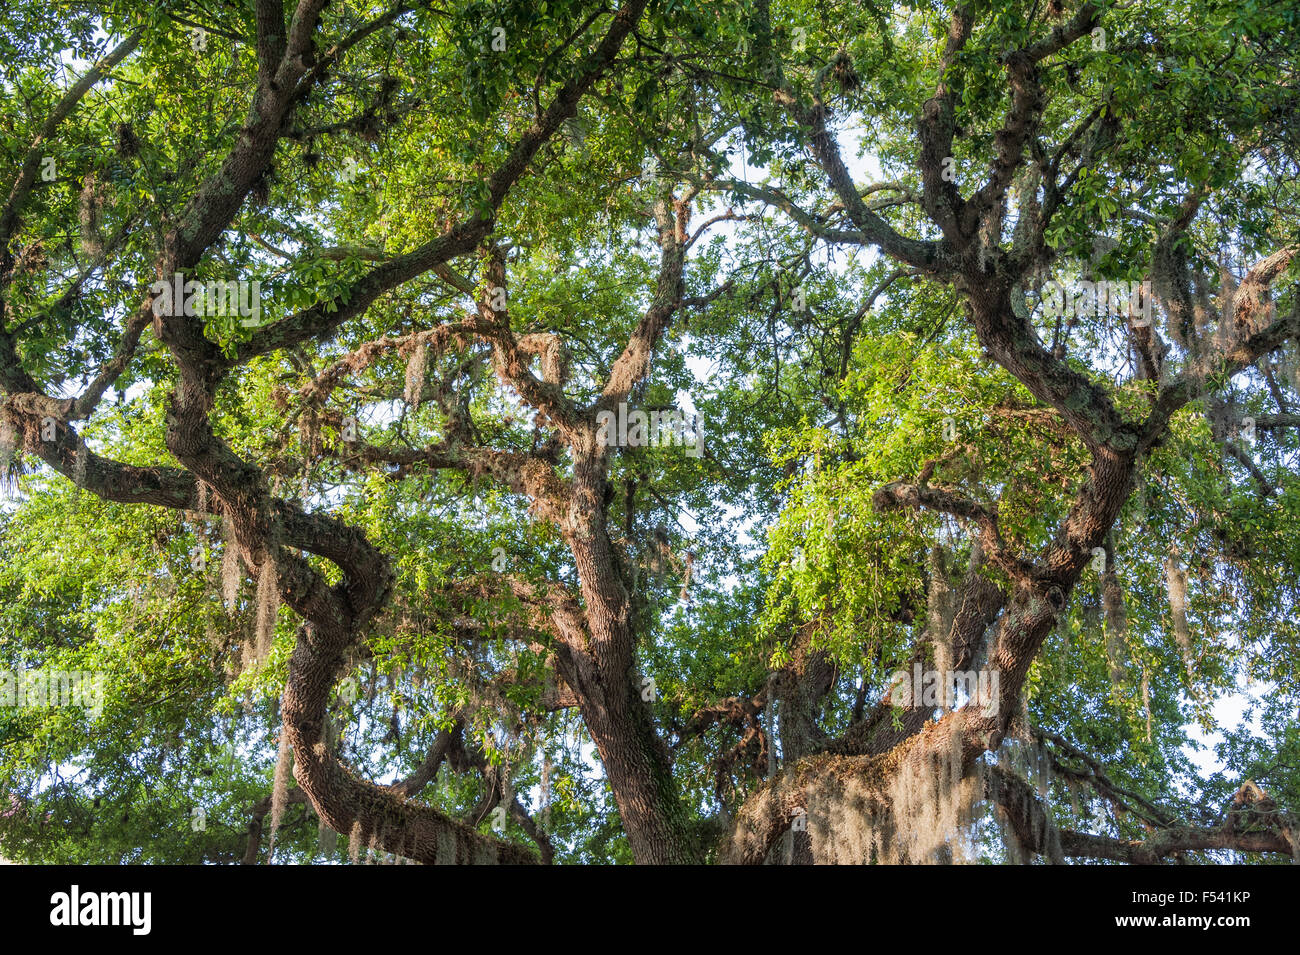 Florida Live Oak tree in Old Town St. Augustine's Constitution Plaza. USA. Stock Photo